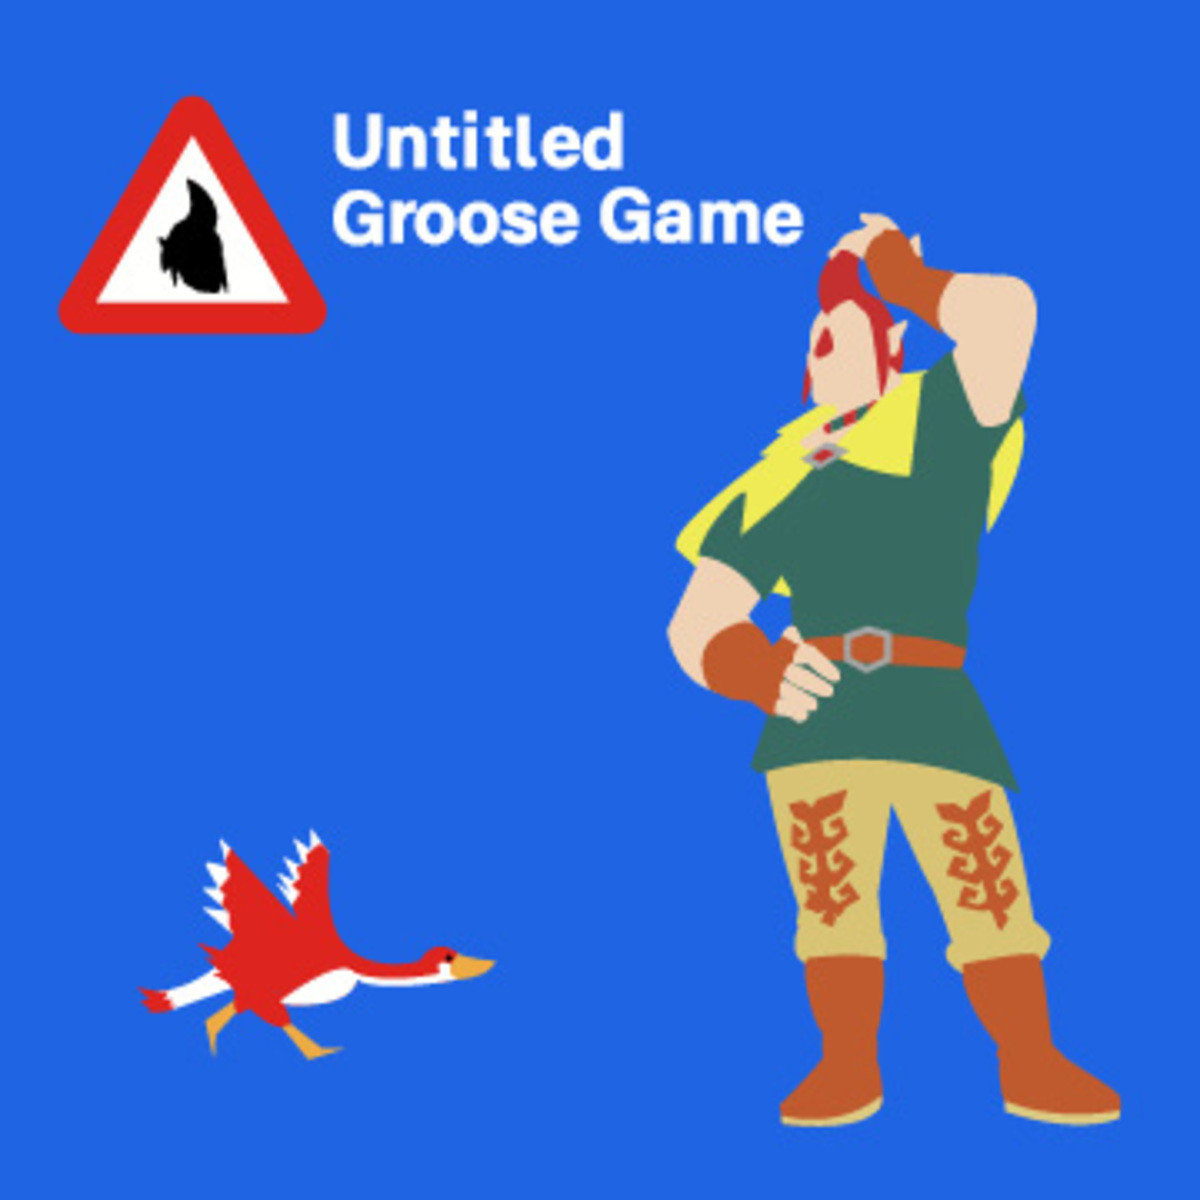 Groose loose the is Wii